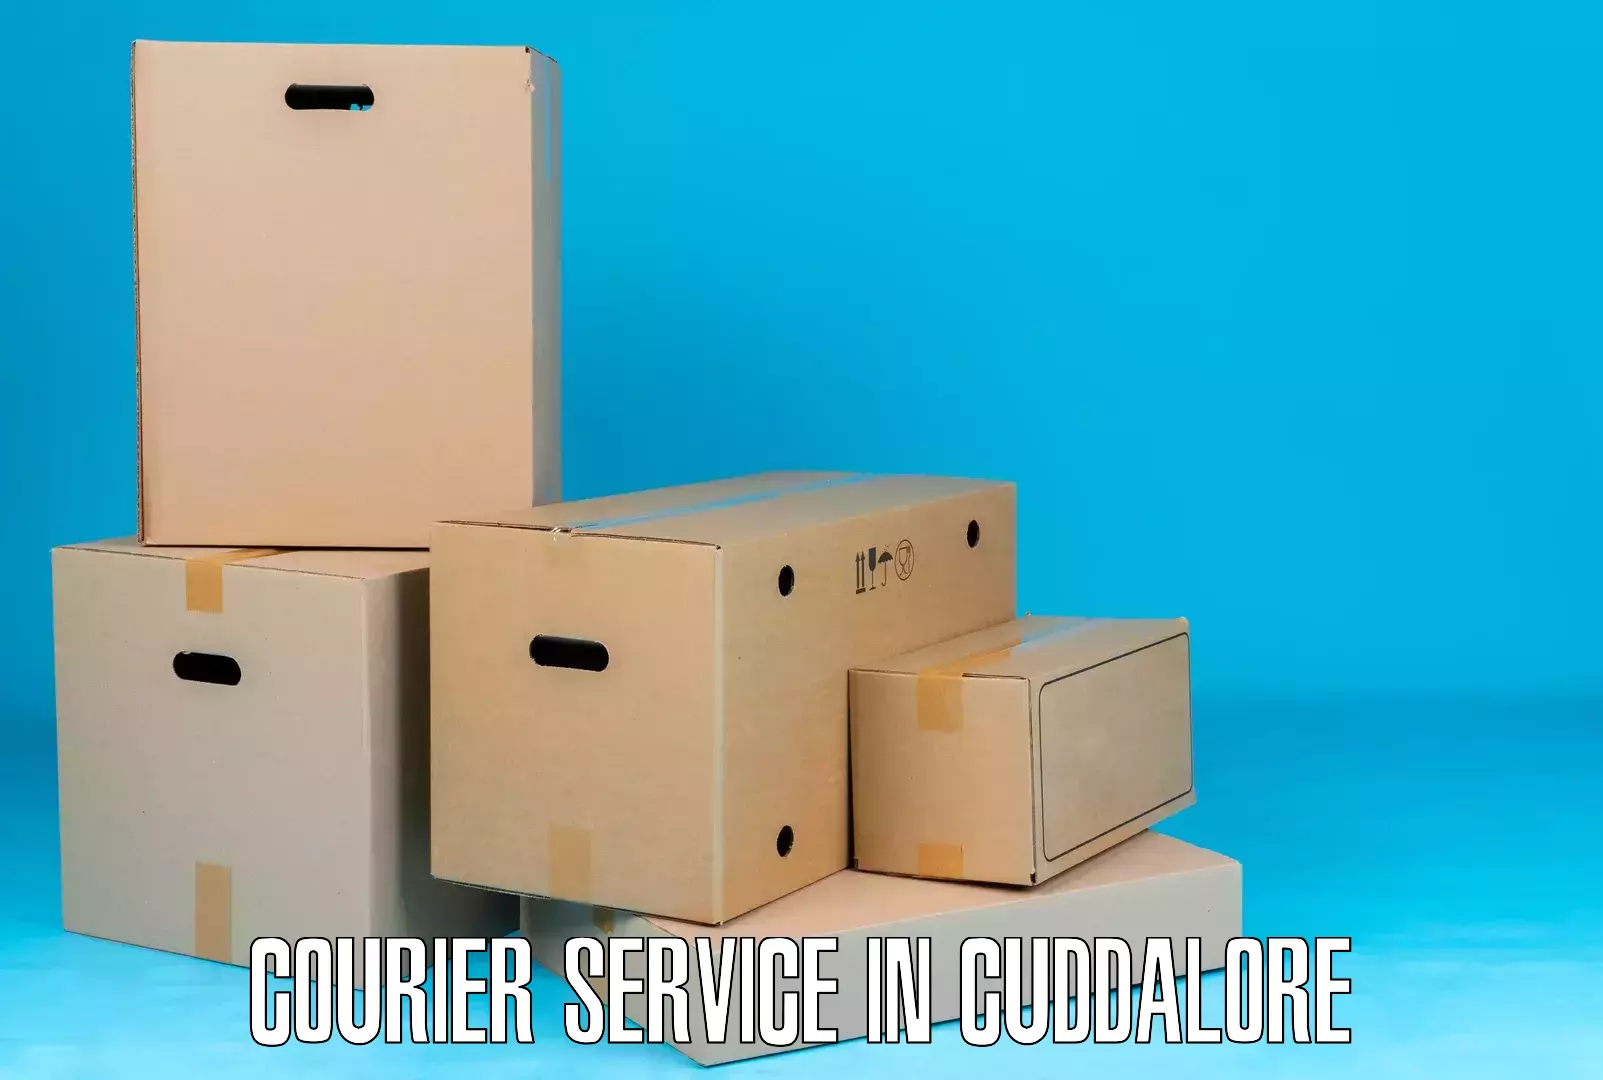 Easy access courier services in Cuddalore